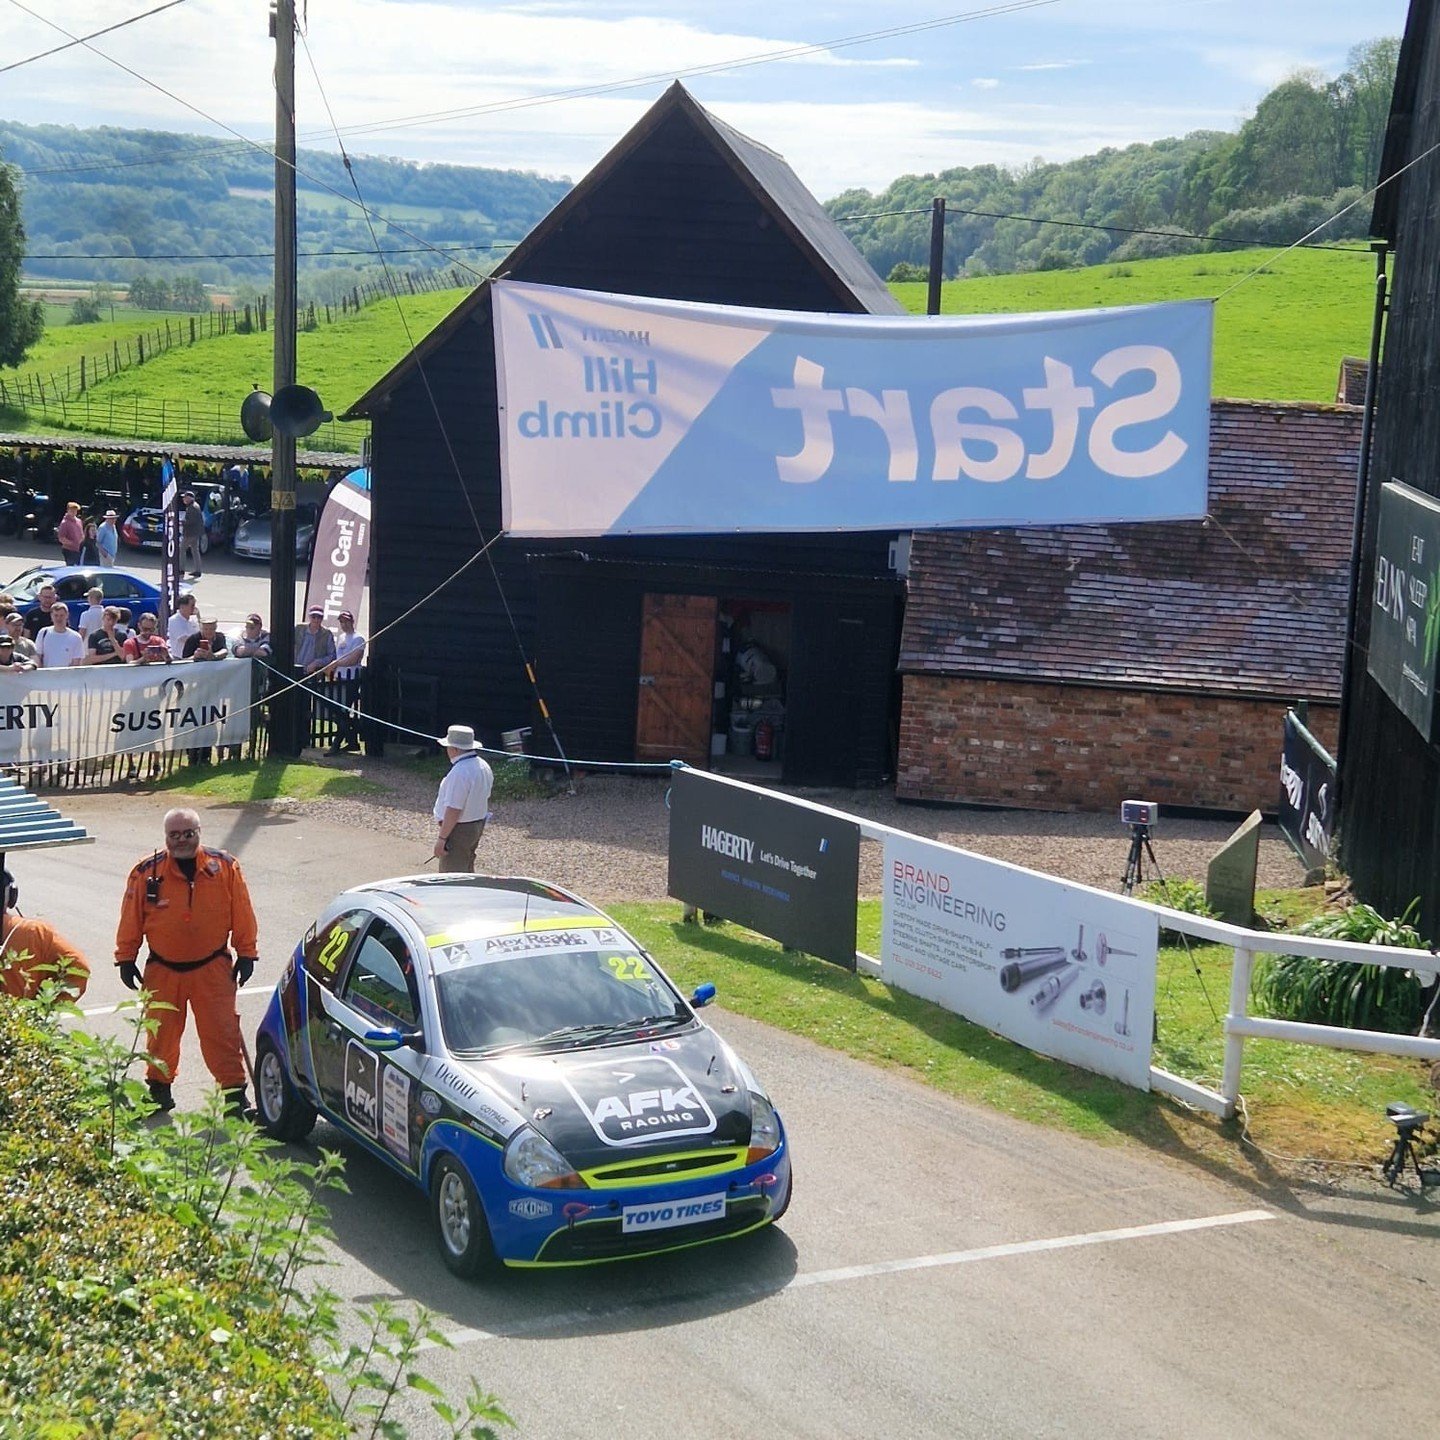 A run up the hill @shelsleywalsh might well be the shortest Detour ever - but it's still 49 seconds of fun!⁠
⁠
Read more at the link in bio.⁠
⁠
======================================⁠
⁠
Follow @detour_roadtrips for inspirational road trips and discov